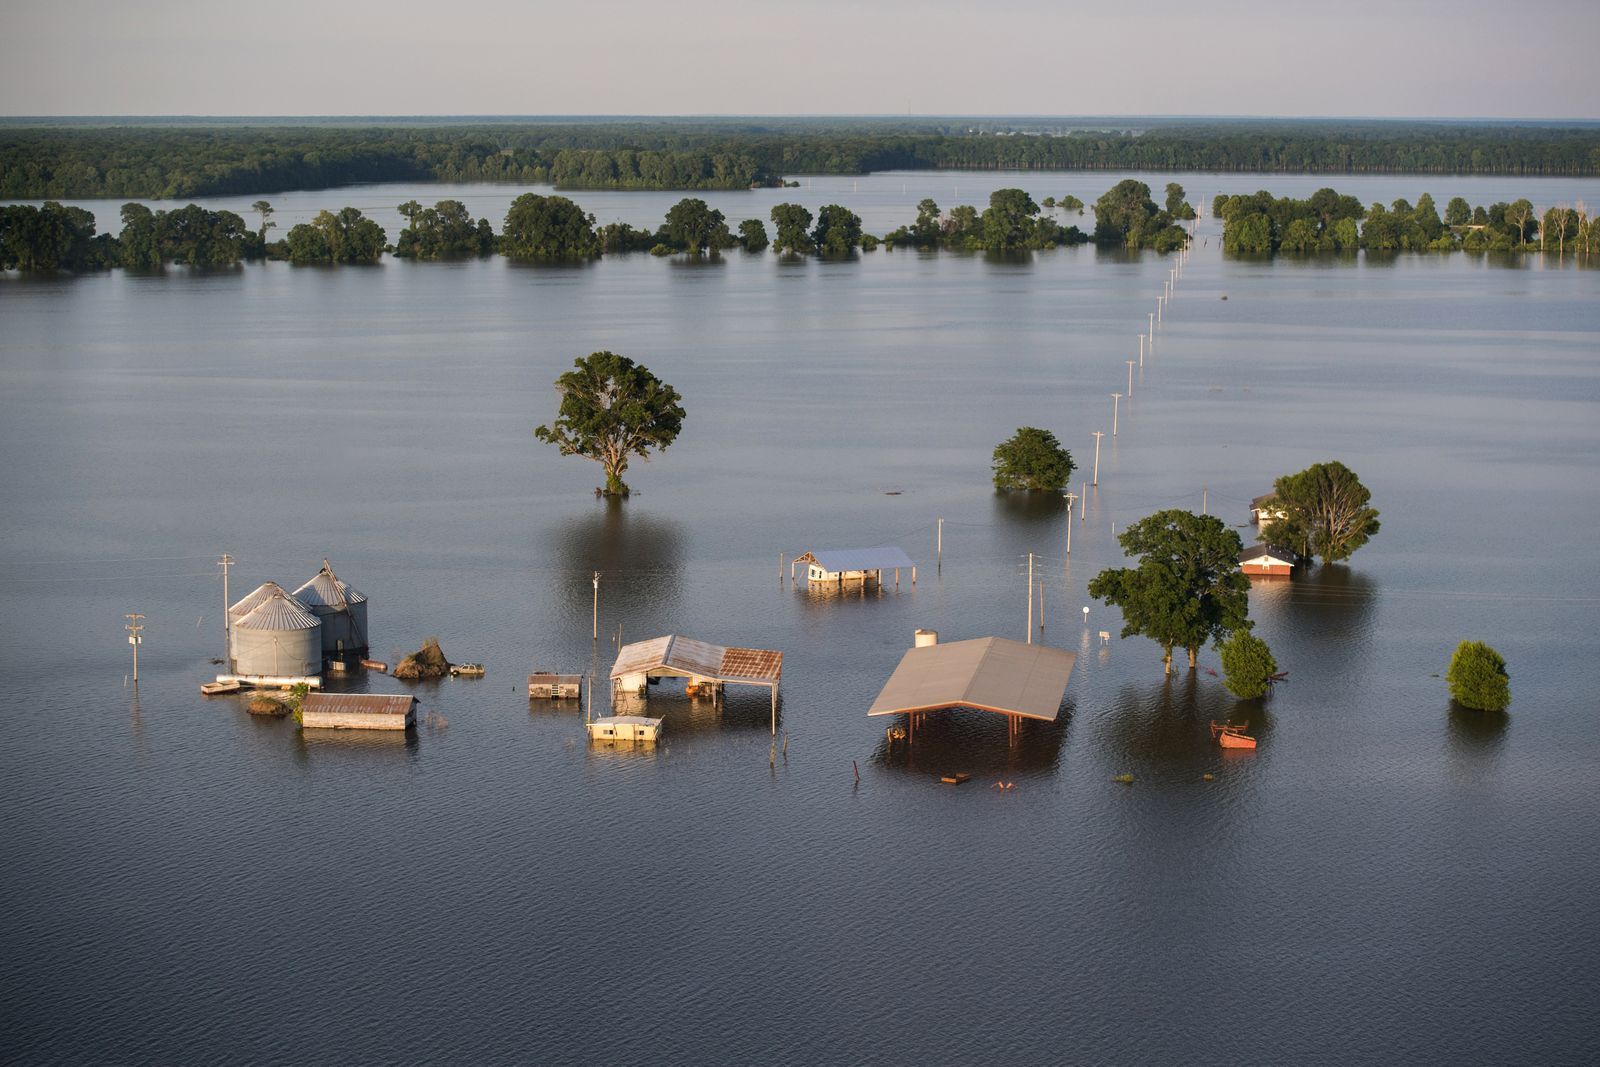 © Rory Doyle - Backwater flooding surrounds a farm in the lower Mississippi Delta June 14, 2019. (Photo by Rory Doyle)